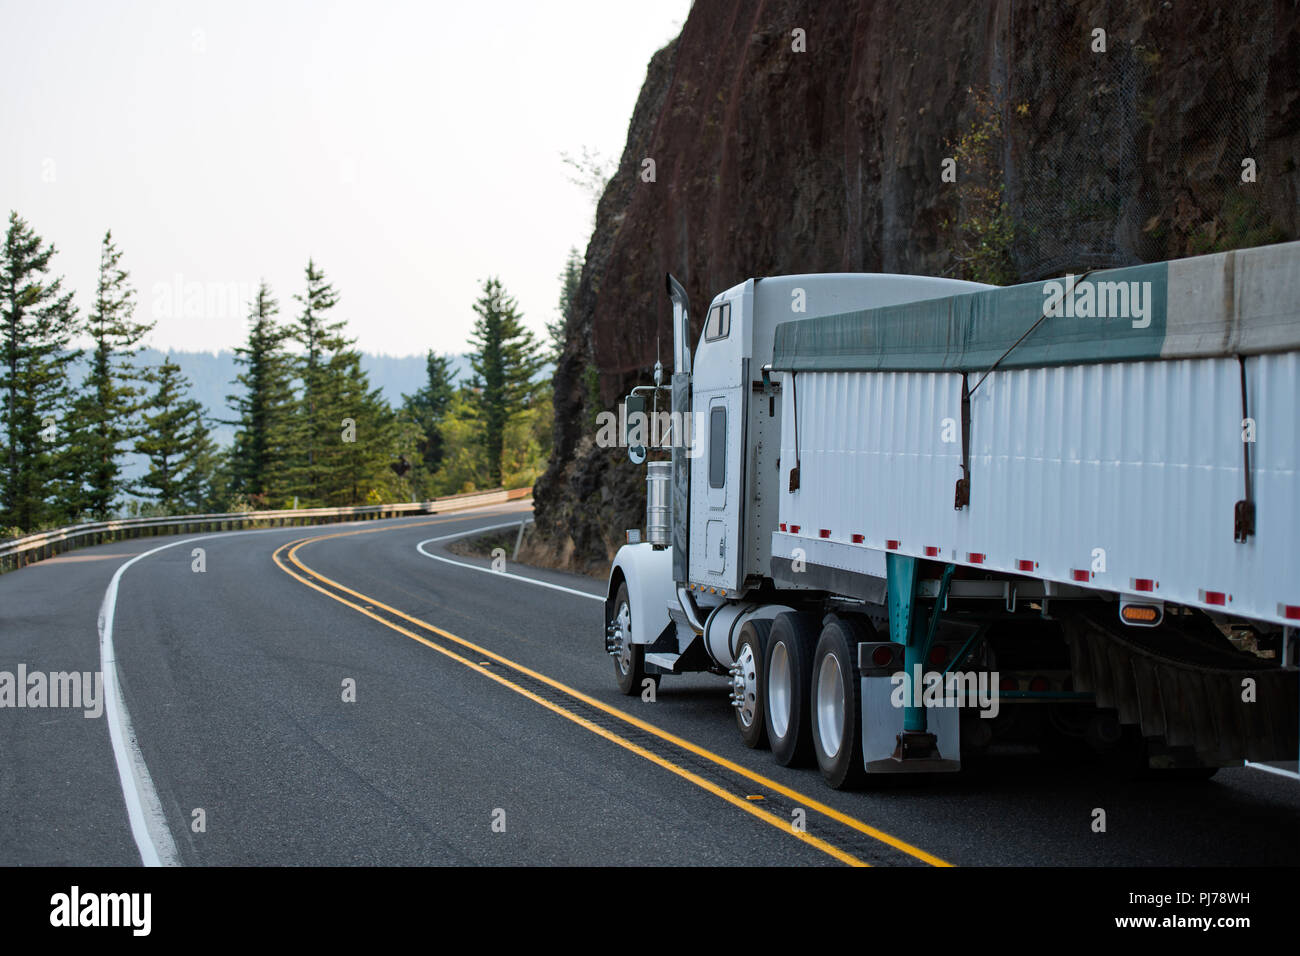 Big rig white American model bonnet semi truck tractor with plastic covered  long bulk semi trailer driving on the curve mountain road with rock mounta  Stock Photo - Alamy